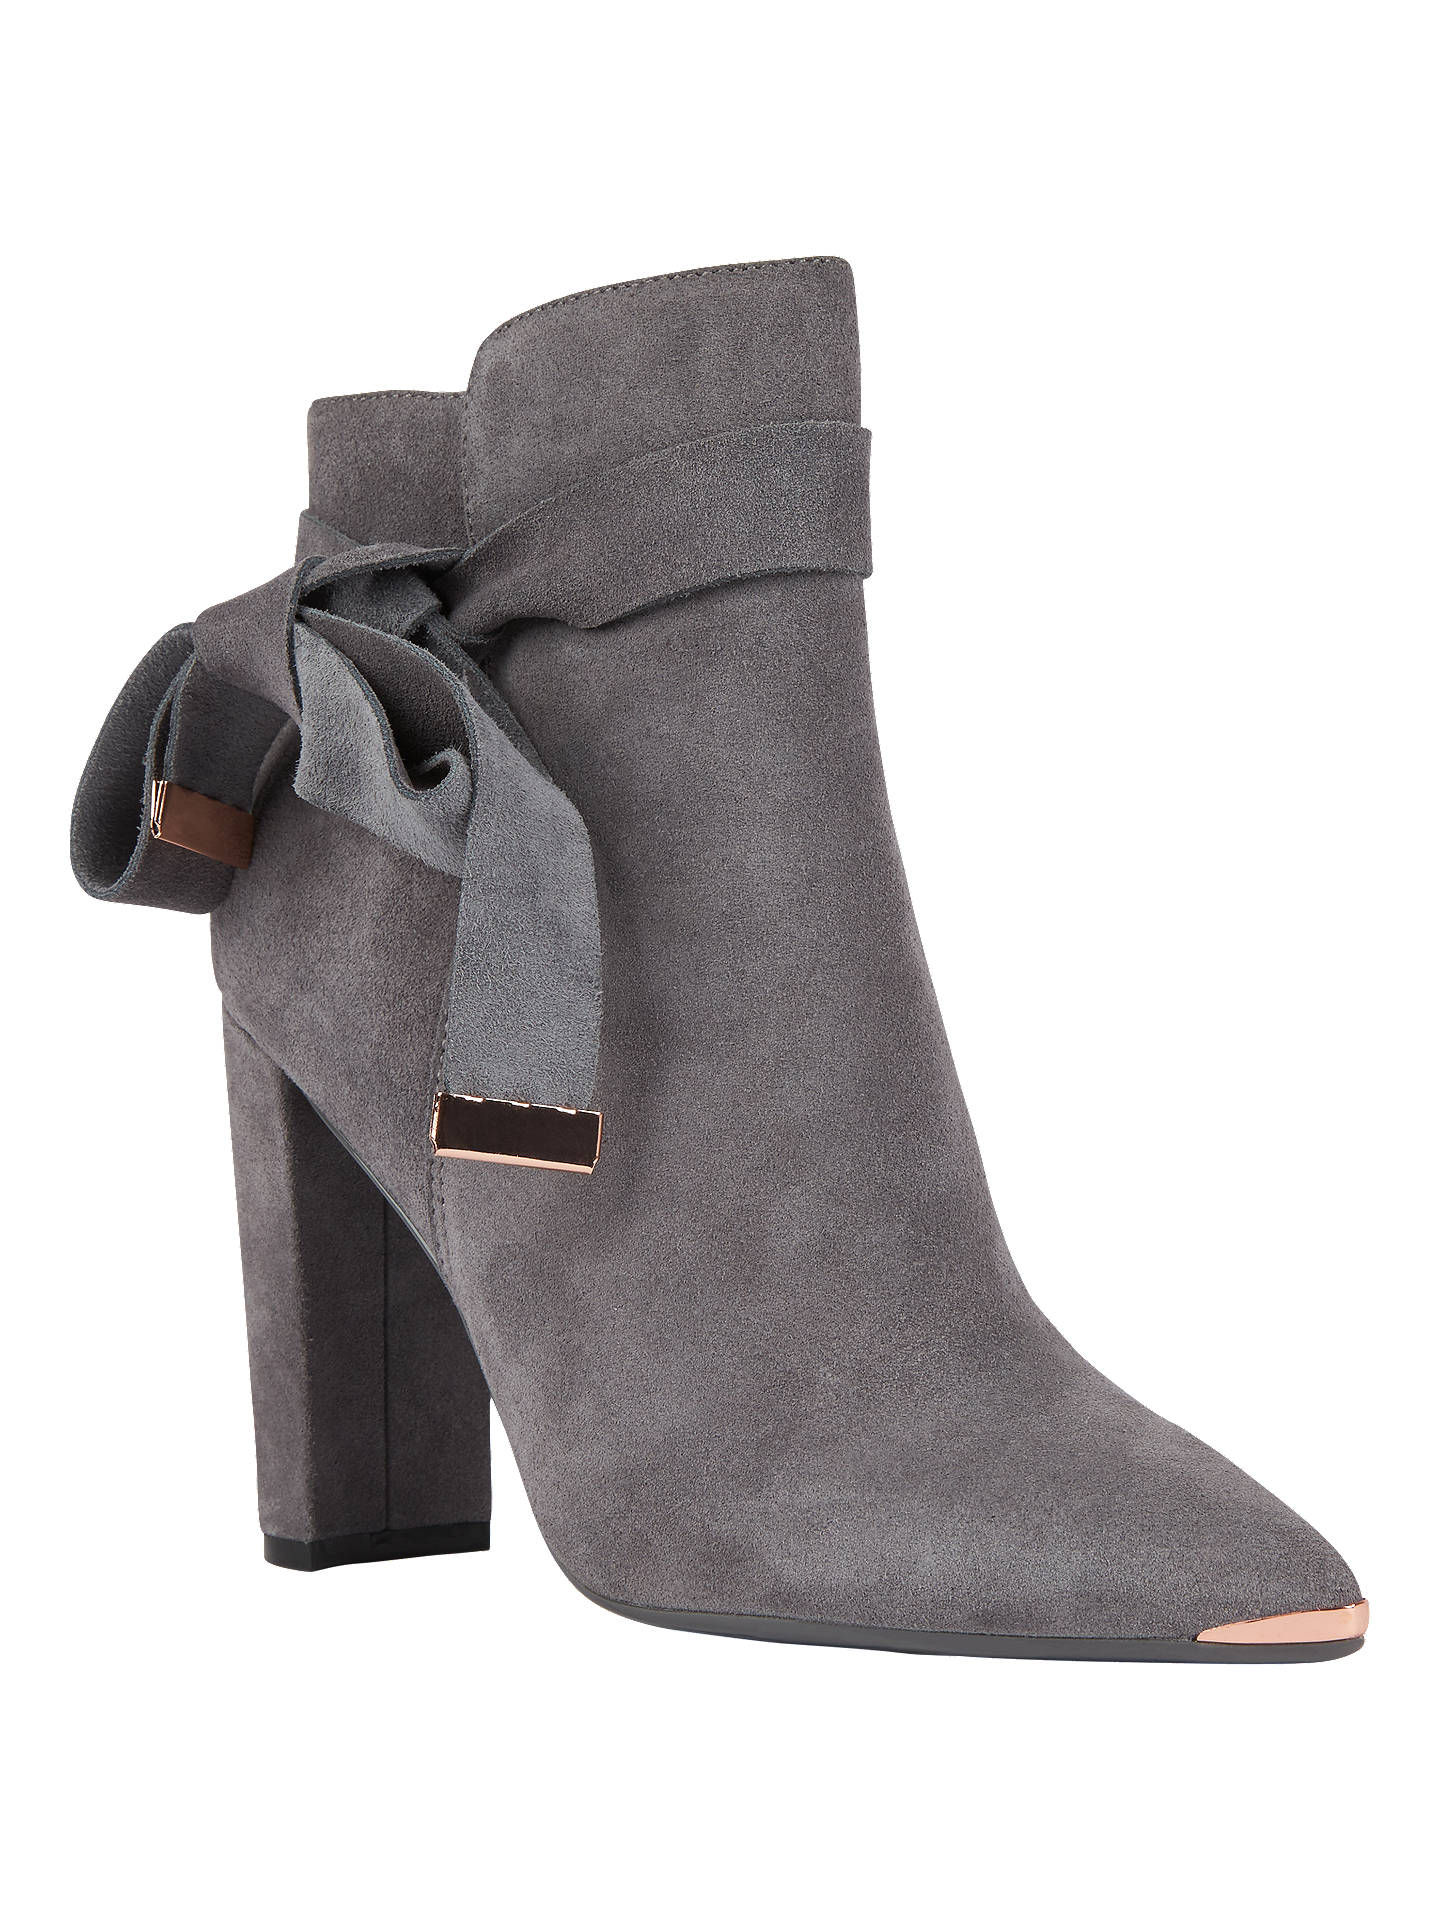 Ted Baker Sailly Block Heel Boots at John Lewis & Partners